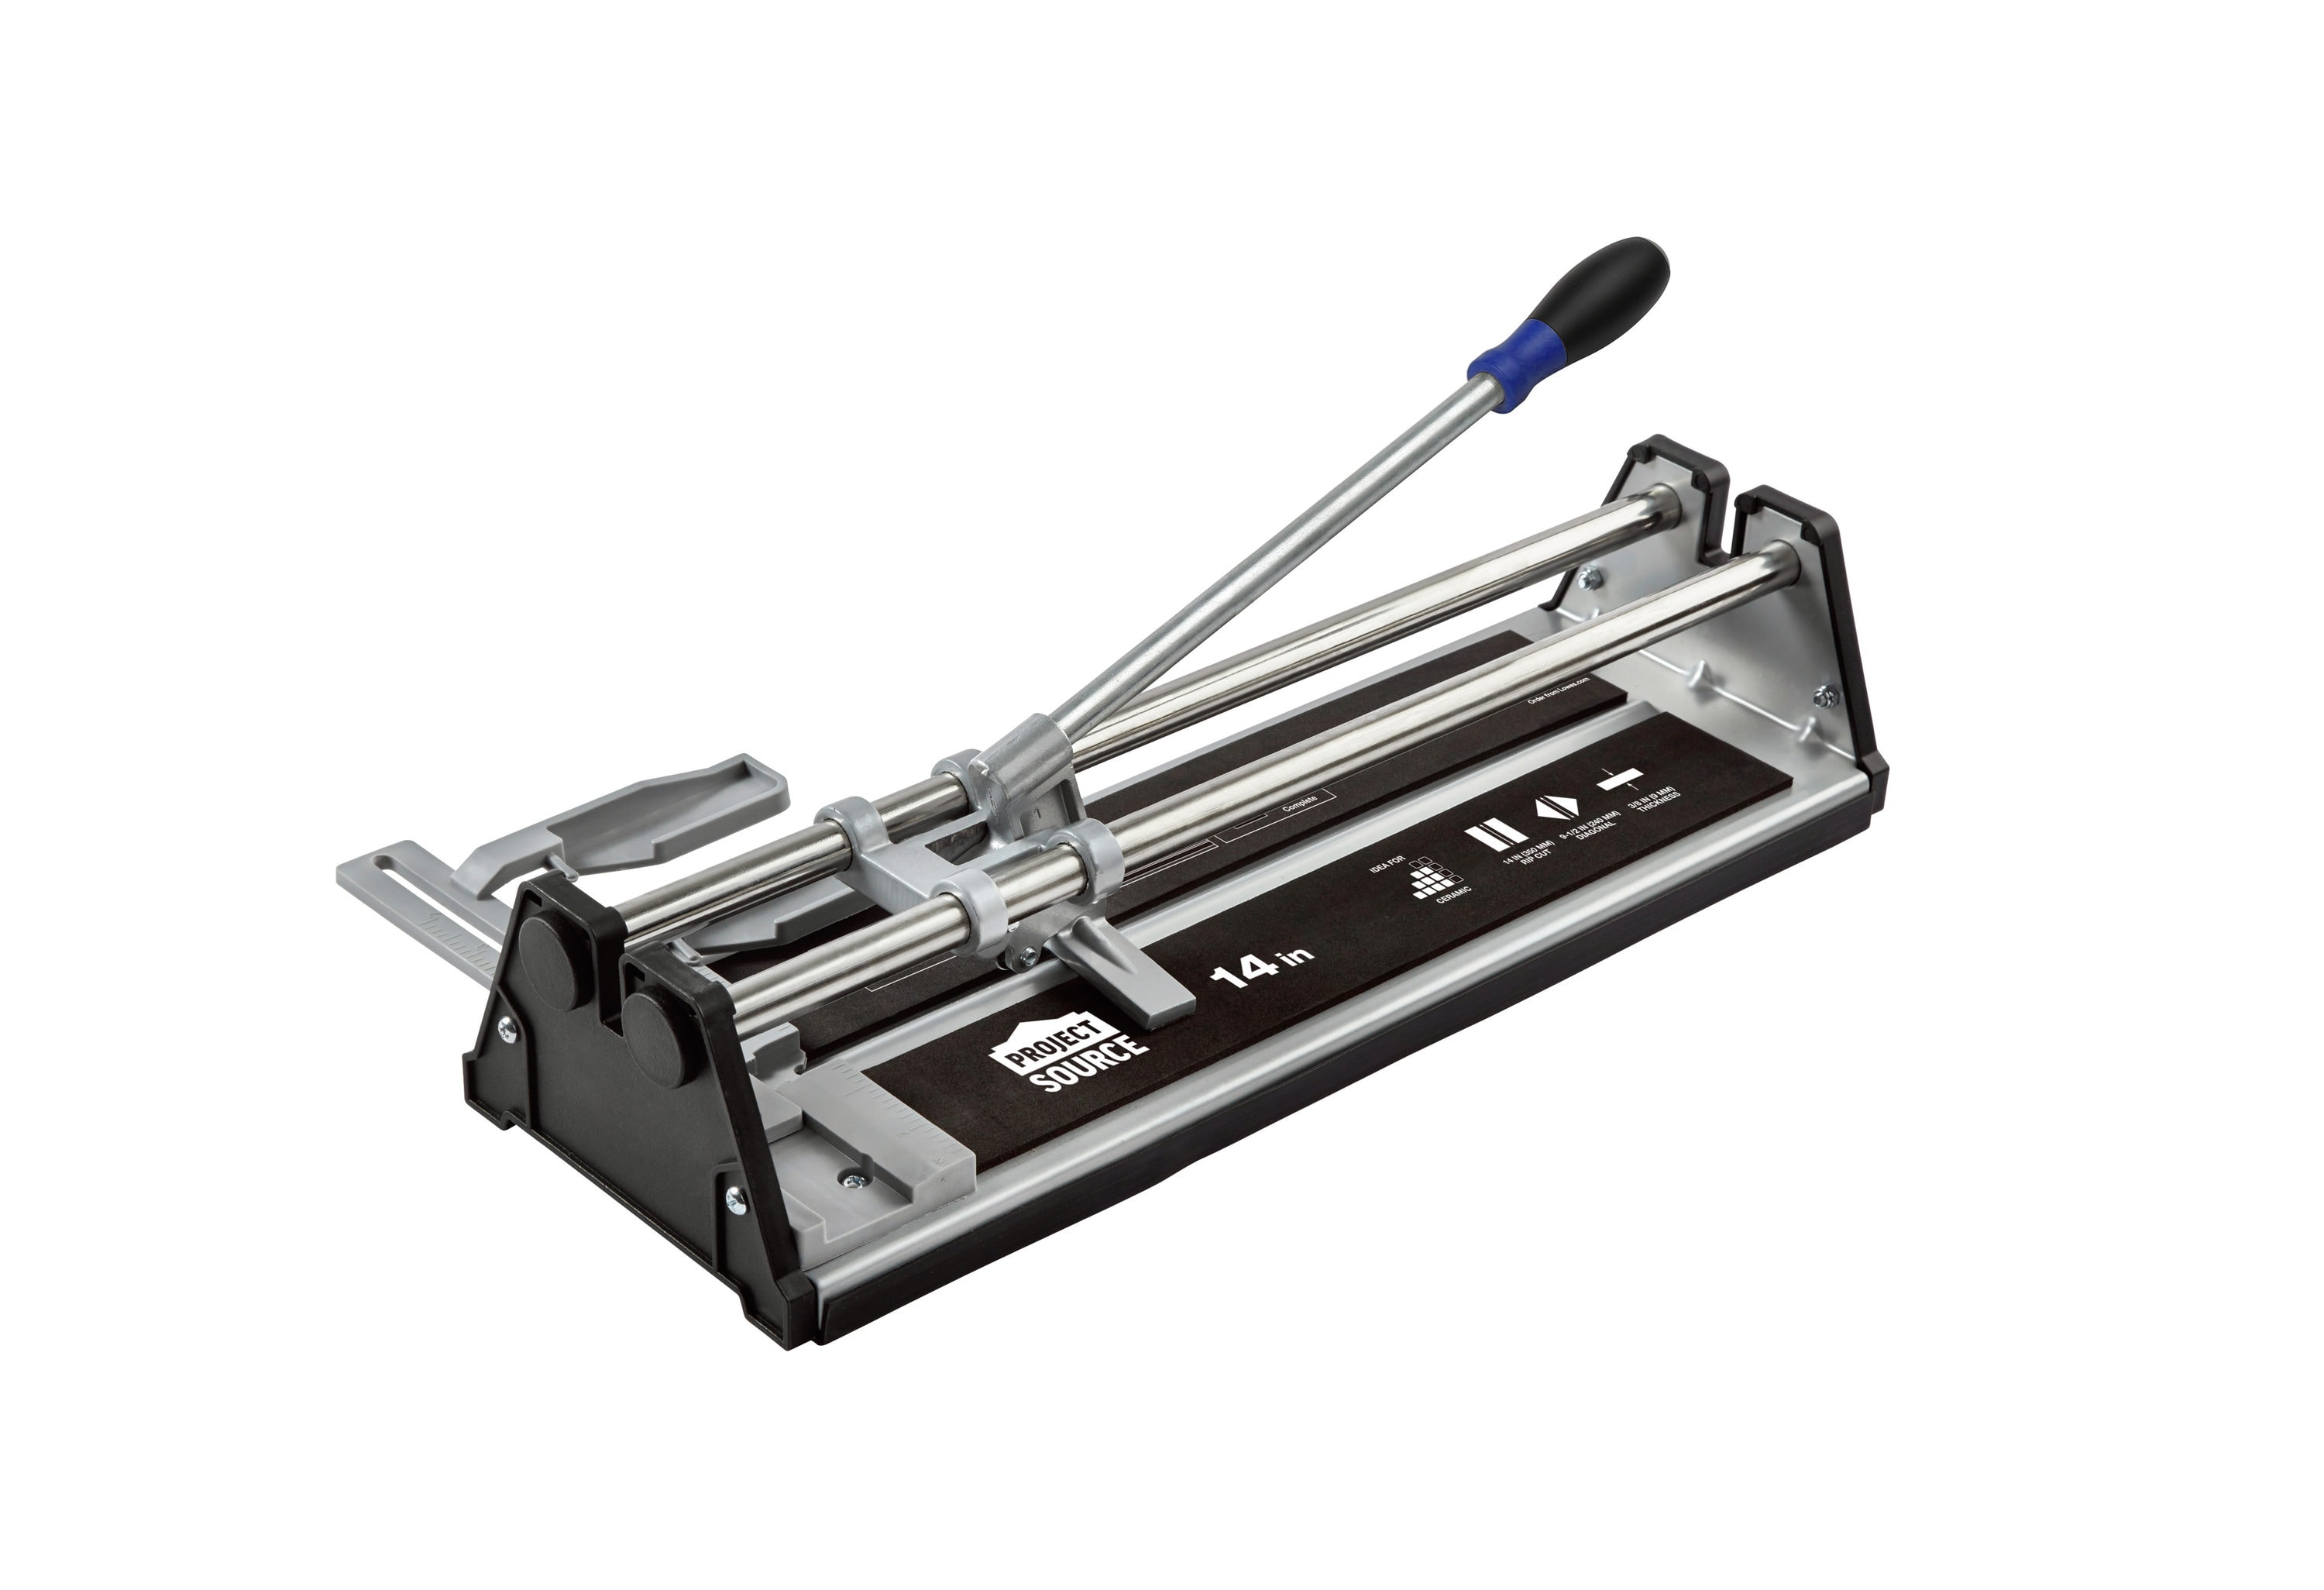 Project Source 14-in Ceramic Tile Cutter Kit | 67820